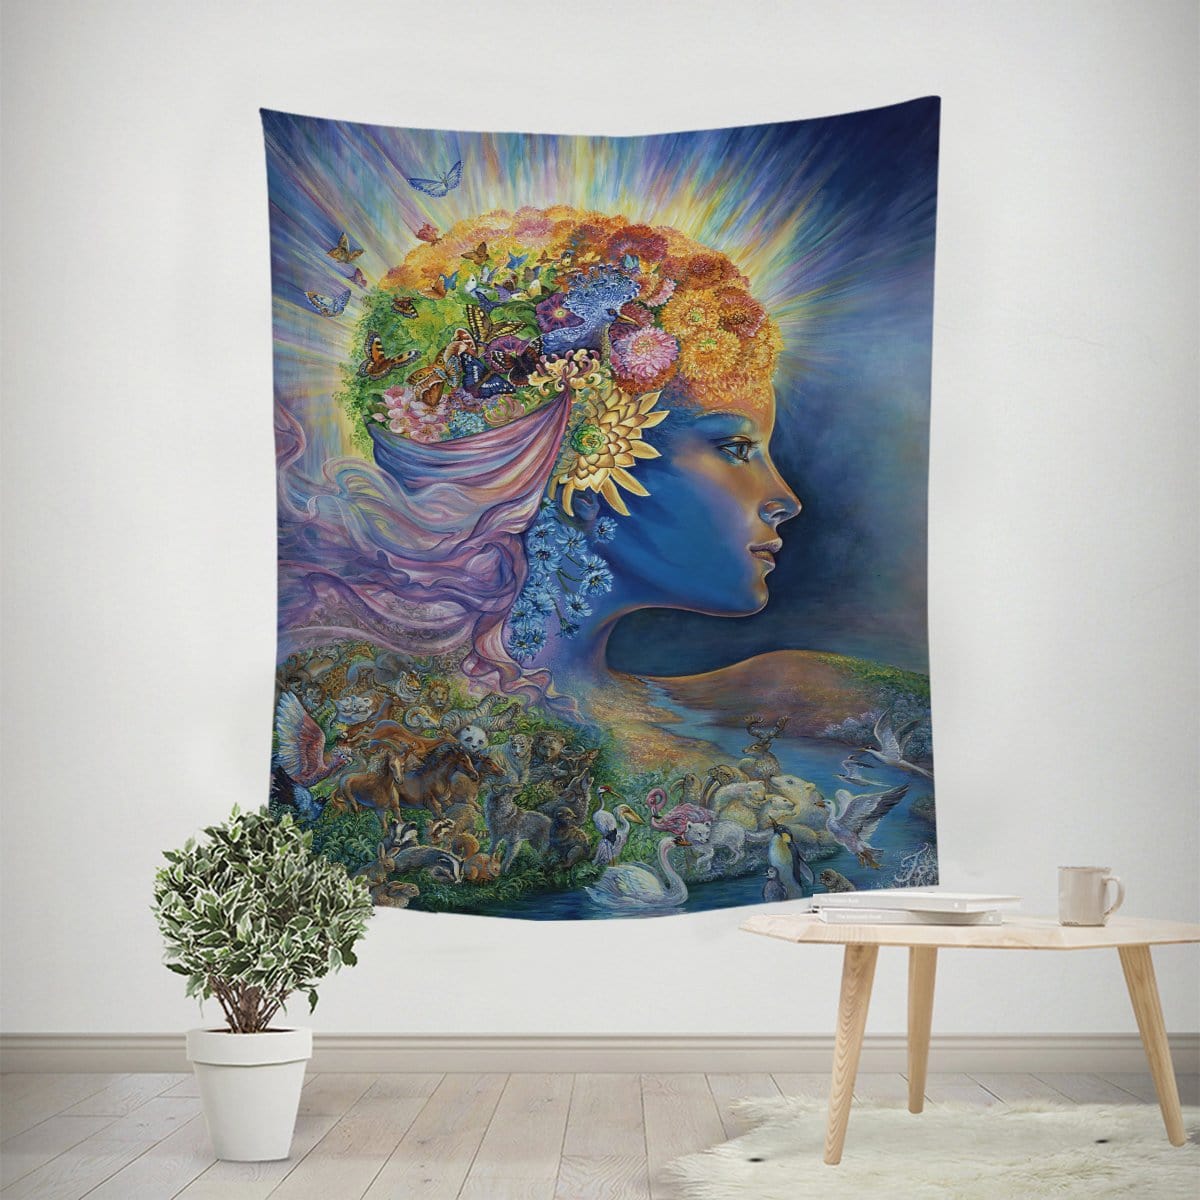 Josephine Wall Presence Of Gaia Tapestry